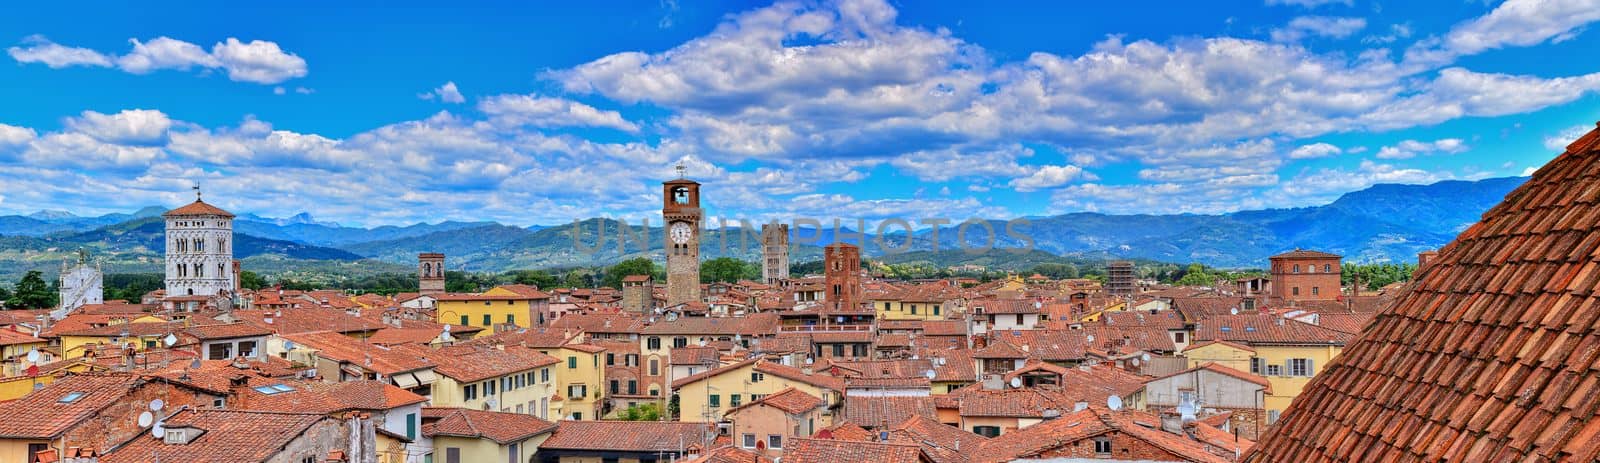 Lucca, Italy - June 26,2018: Beautiful medieval town Lucca in Tuscany. Houses with red roofs.